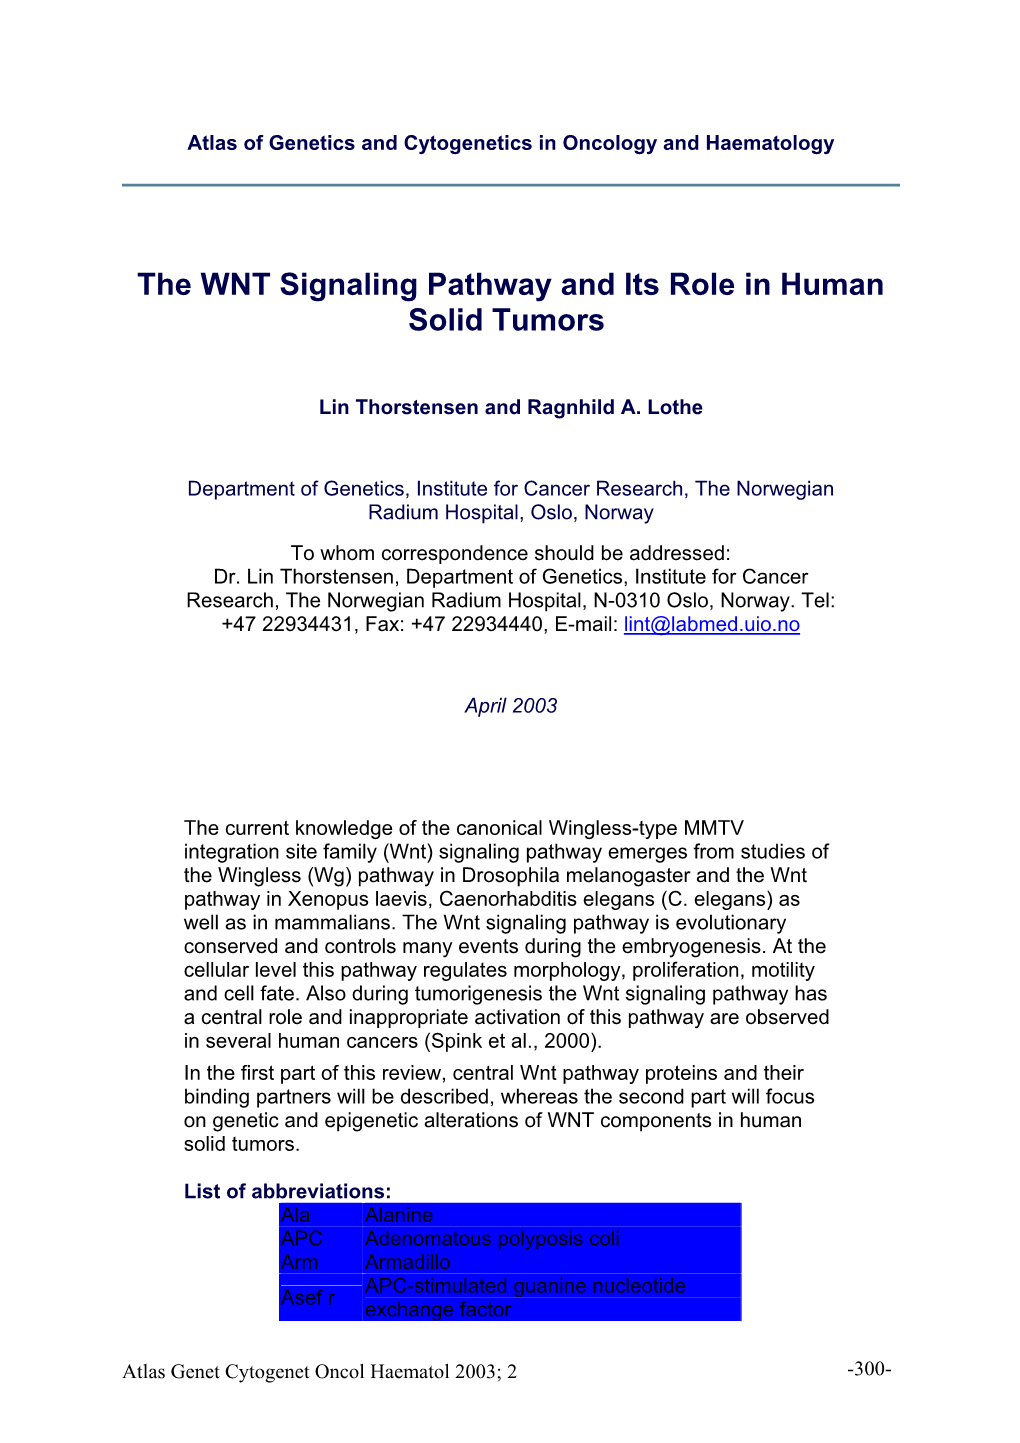 The WNT Signaling Pathway and Its Role in Human Solid Tumors